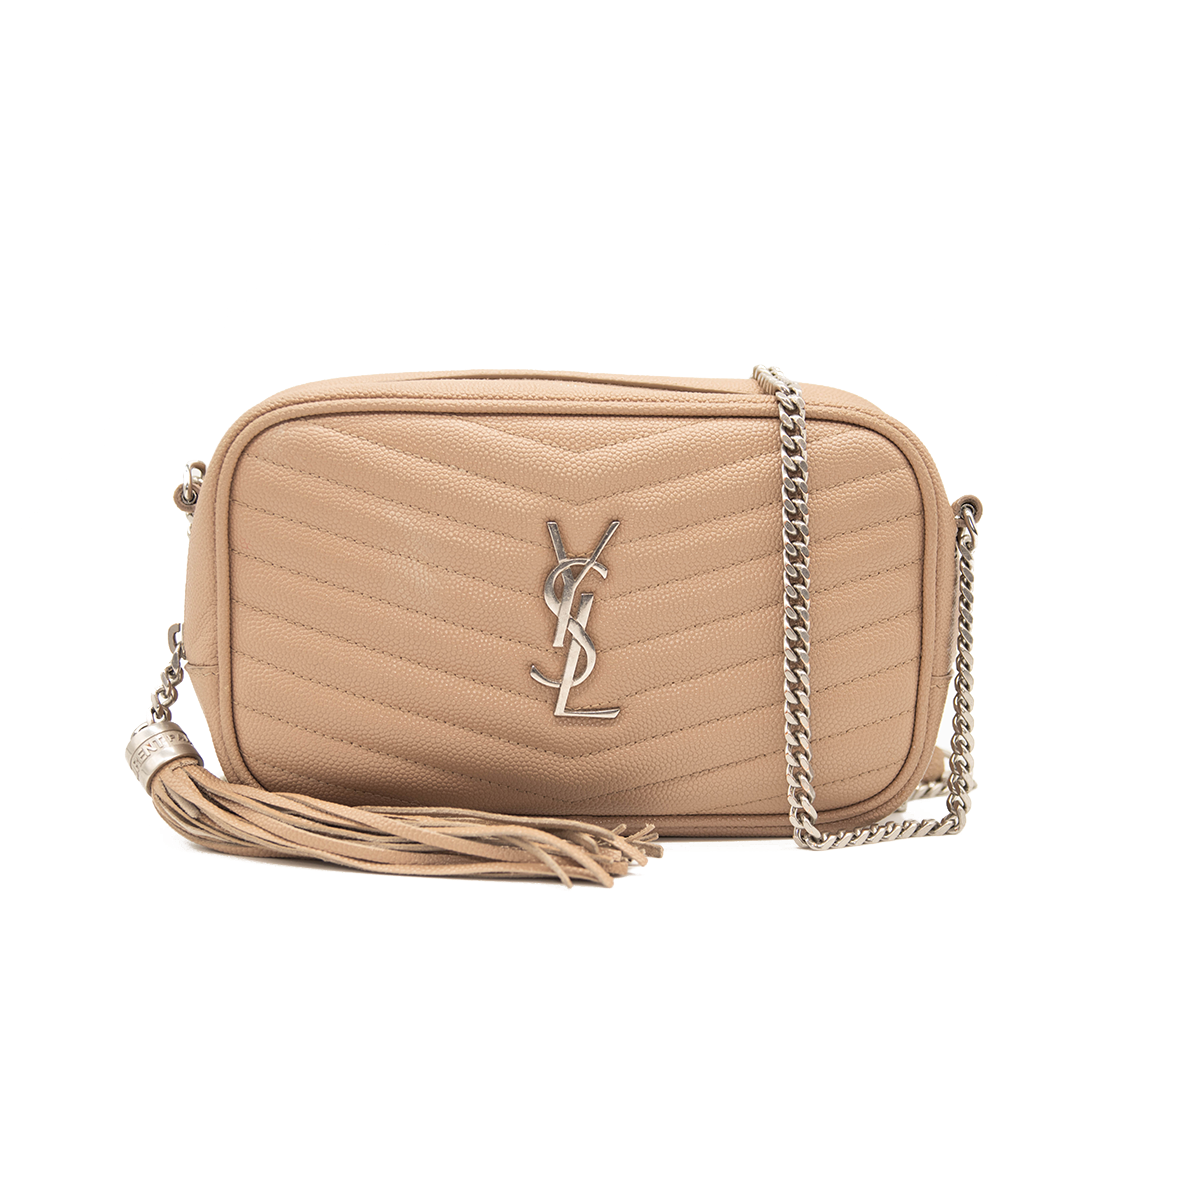 YSL Mini Lou Gray Camera Bag Gold Hardware. Made in Italy. With